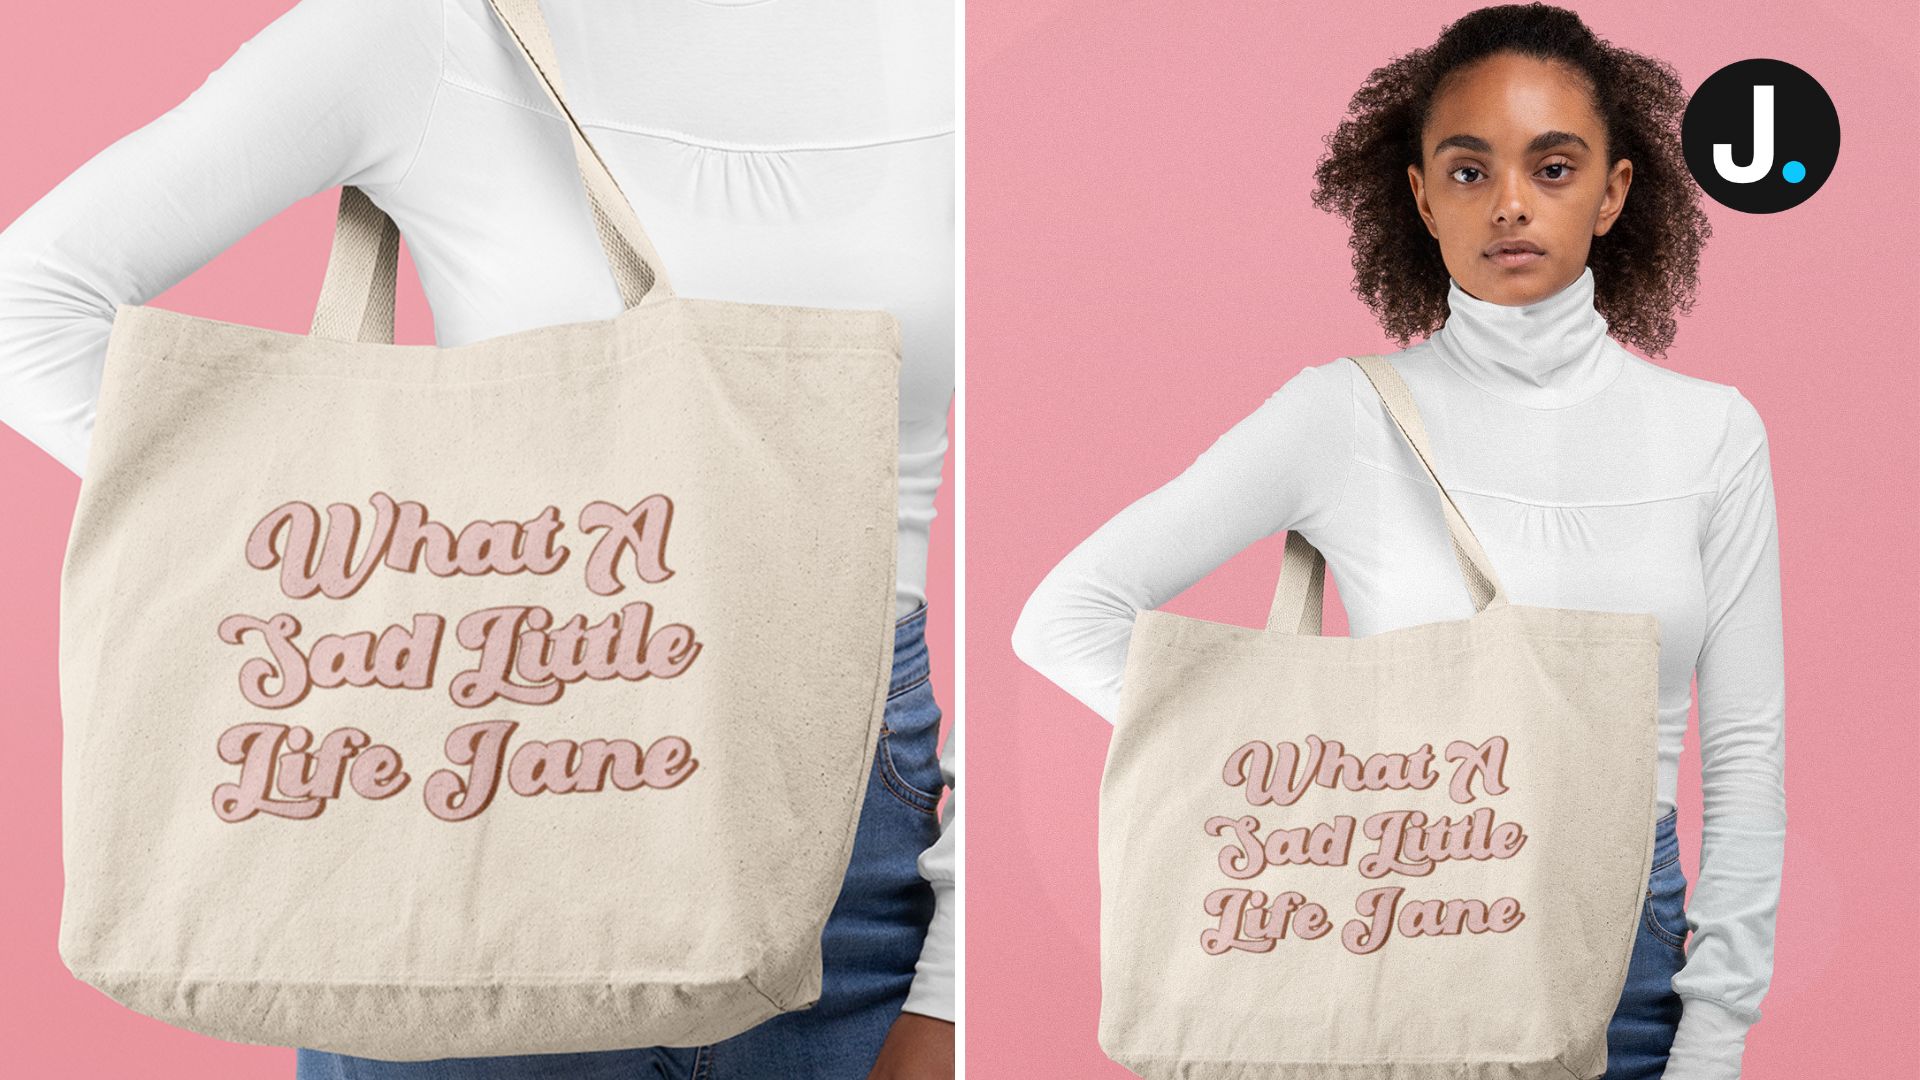 What A Sad Little Life Jane Tote Bag - Come Dine With Me Inspired Tote ...